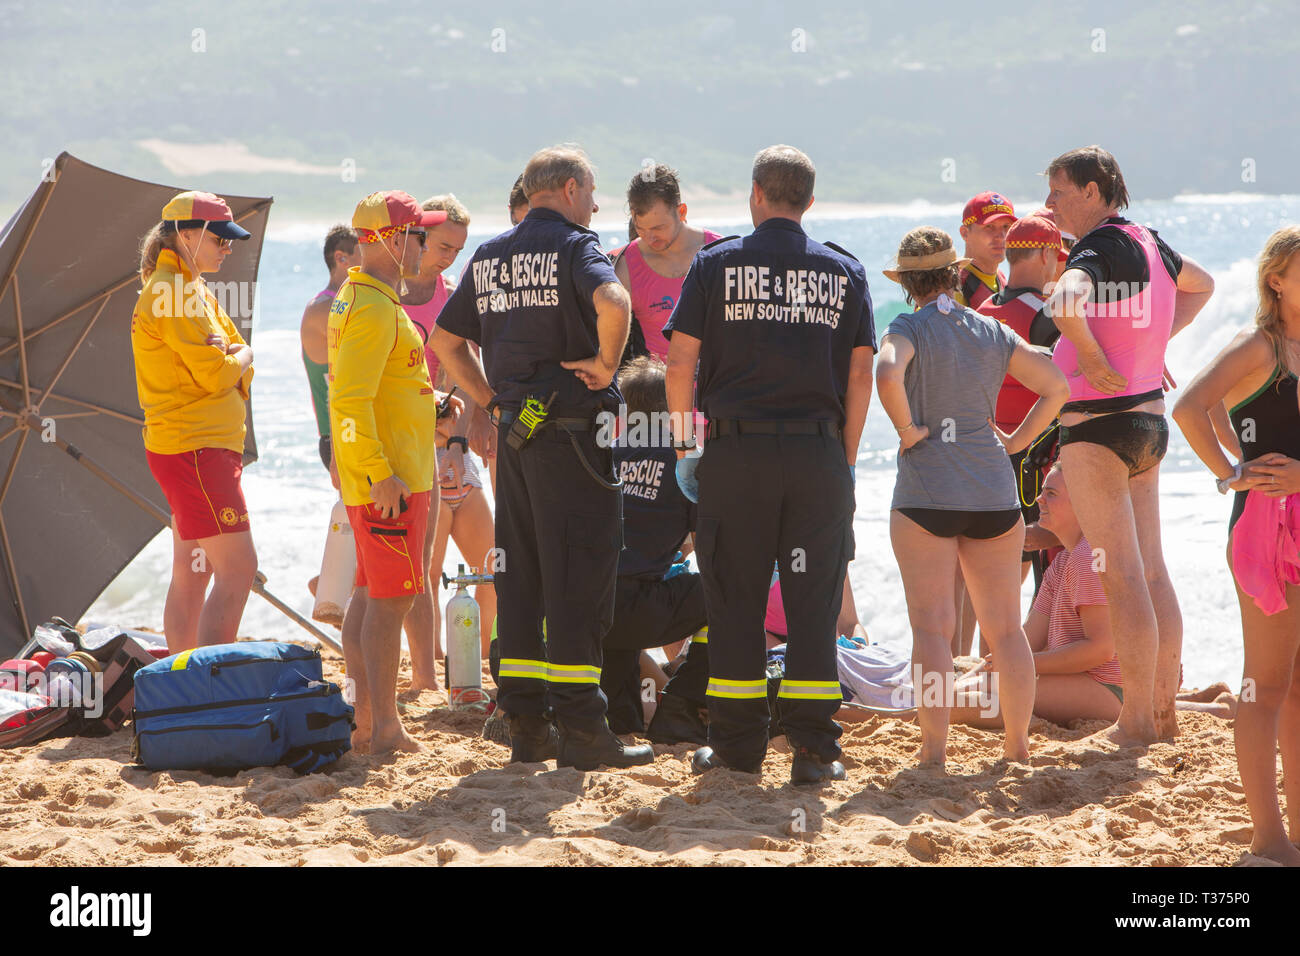 man rock fishing was rescued and feared drowned at Palm Beach Sydney, surf rescue lifeguards and others provide oxygen and CPR until ambulance arrive. Stock Photo